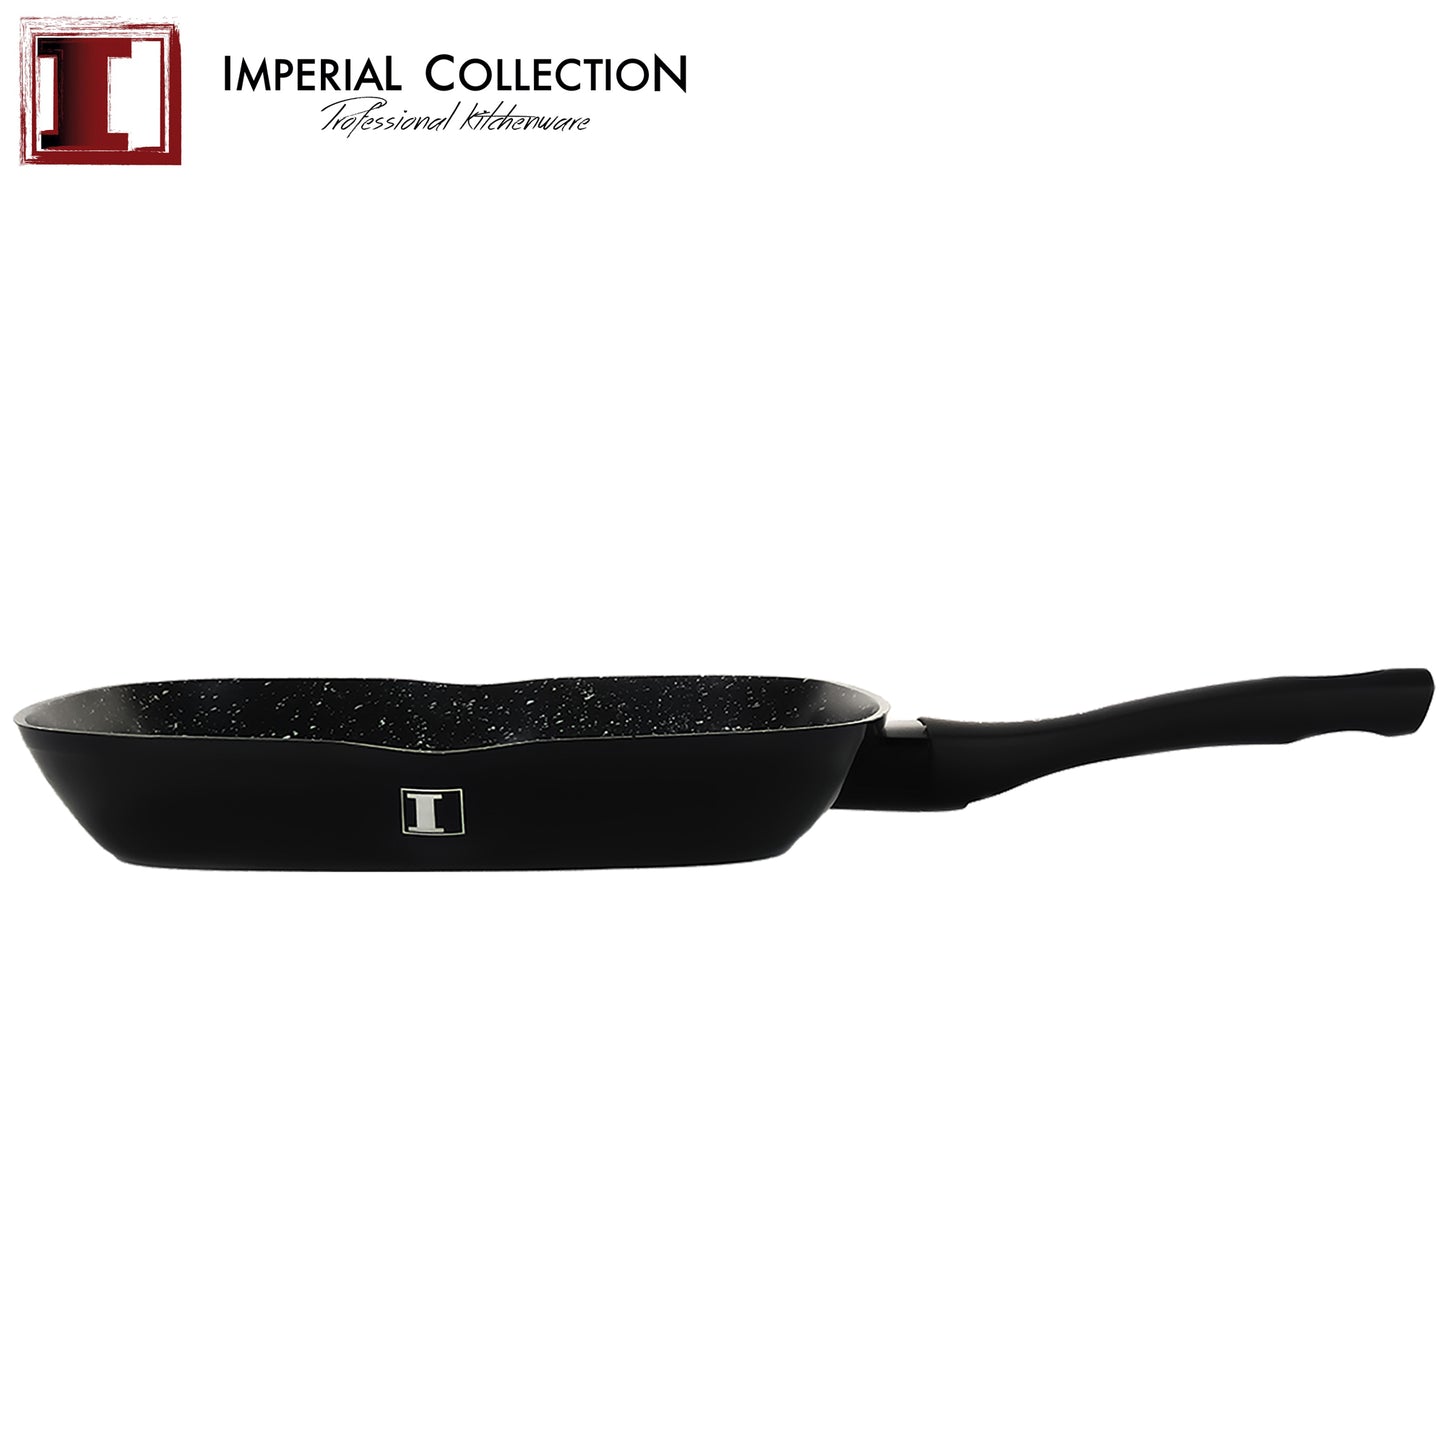 Imperial Collection 28 Cm Marmeren Grillpan